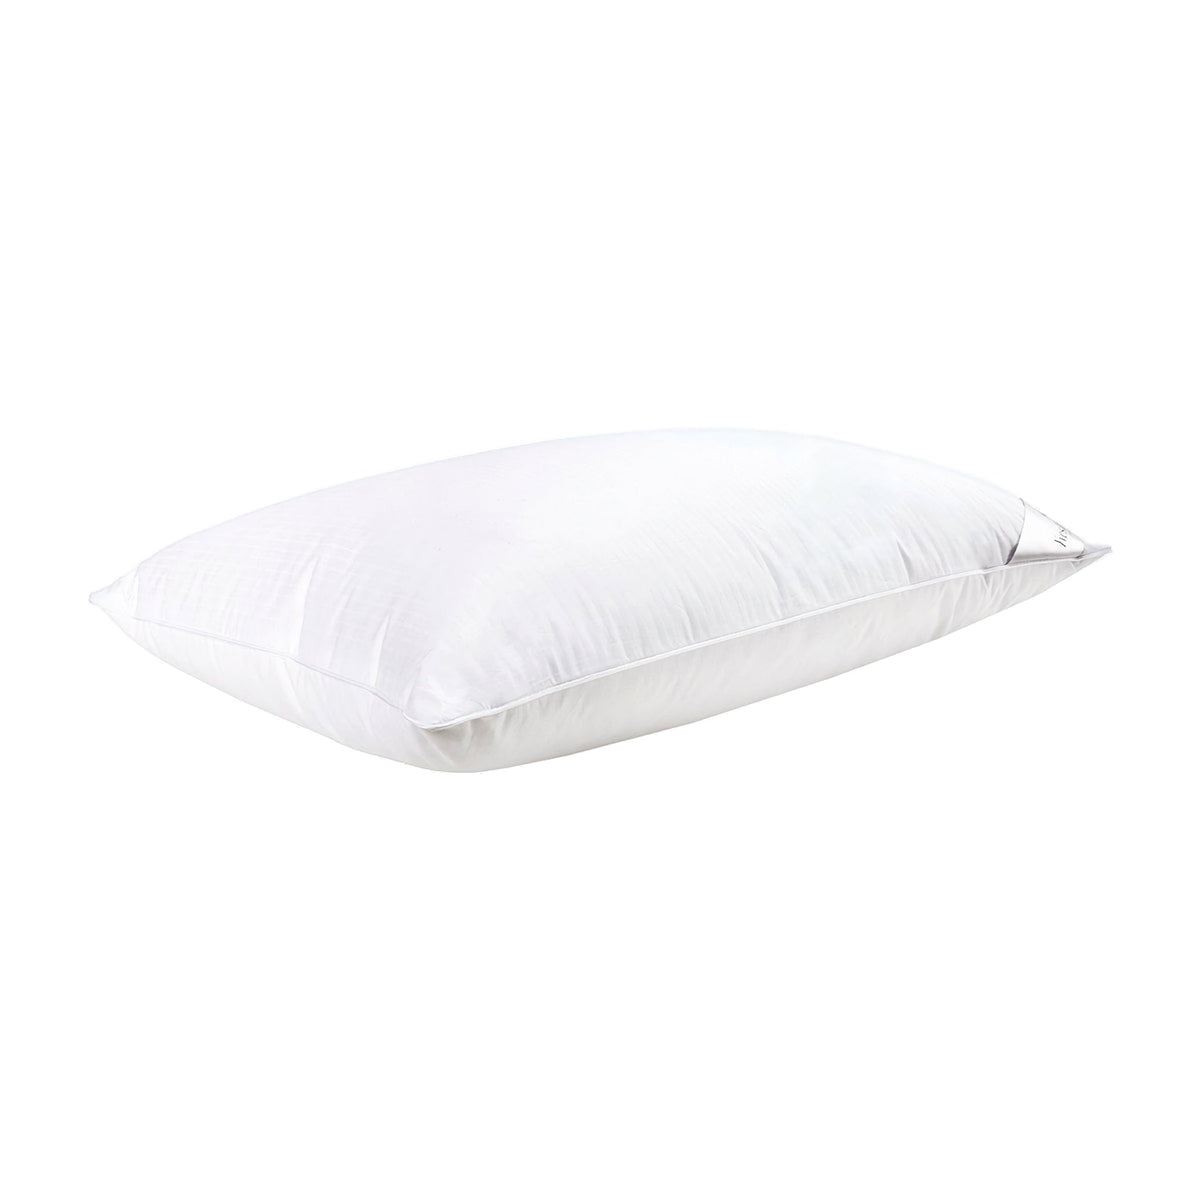 Yves Delorme Down &amp; Feather 3 Chamber Pillows floating against white background